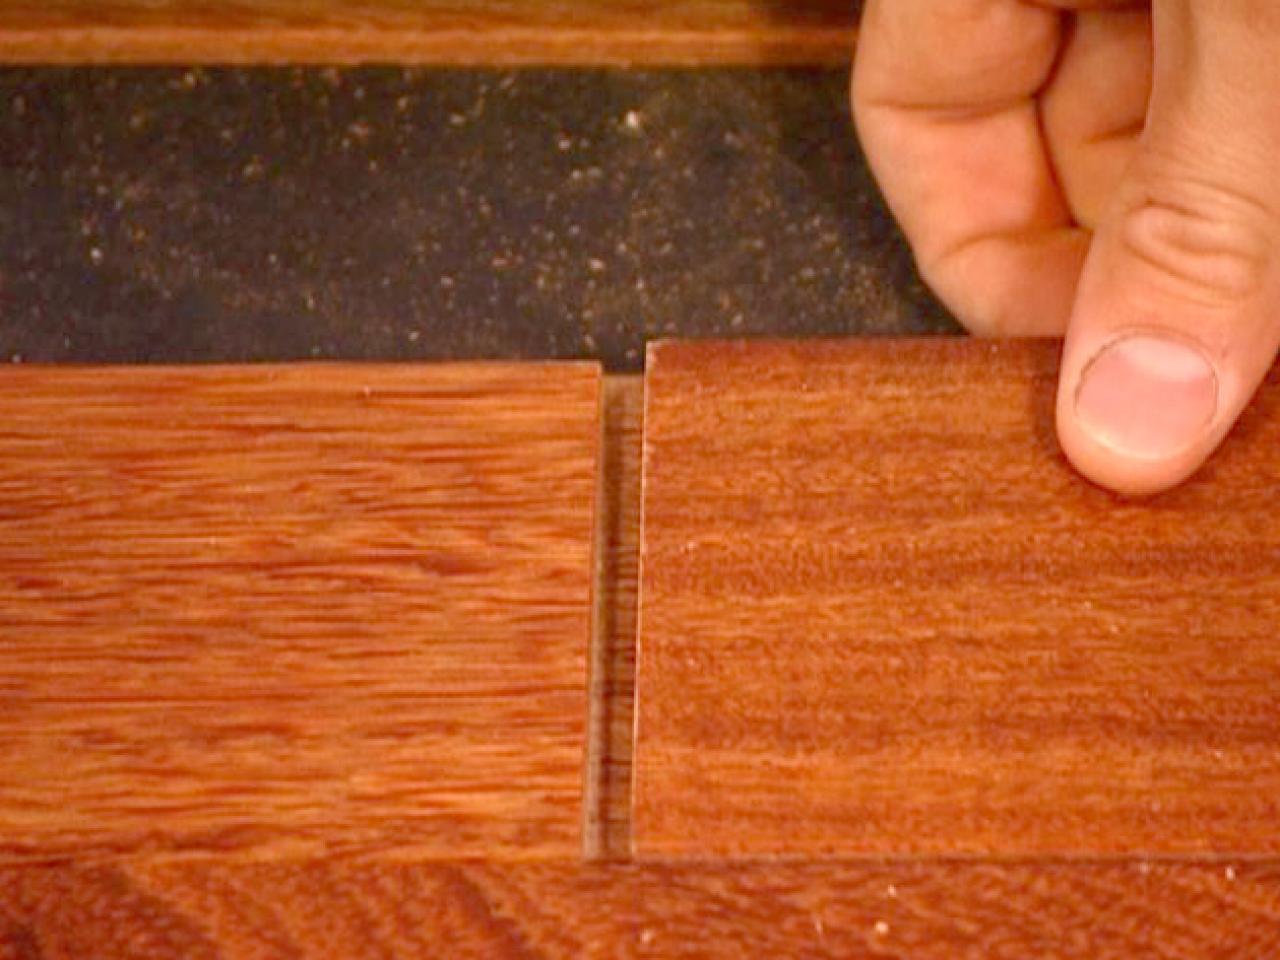 How To Install A Hardwood Floor, What Size Staples For 3 4 Hardwood Flooring